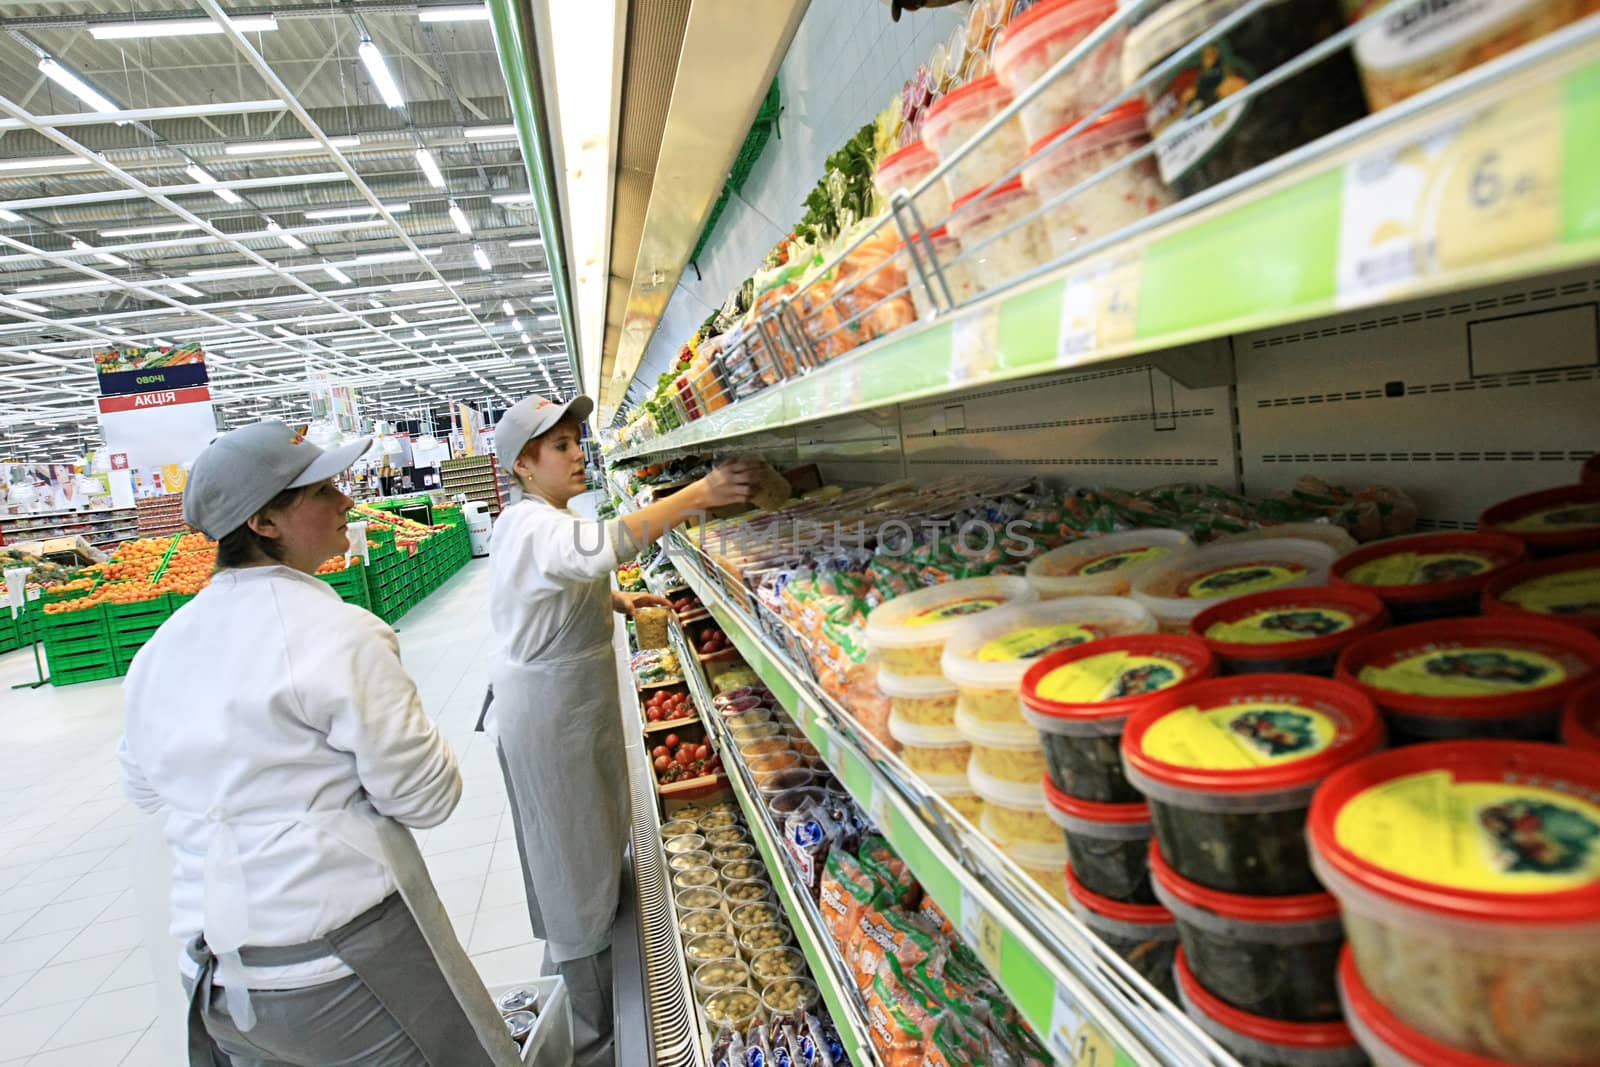  KYIV, UKRAINE - NOVEMBER 13: Worker in supermarket during preparation for the opening of the first store of OK supermarket network on November 13, 2007 in Kyiv, Ukraine.